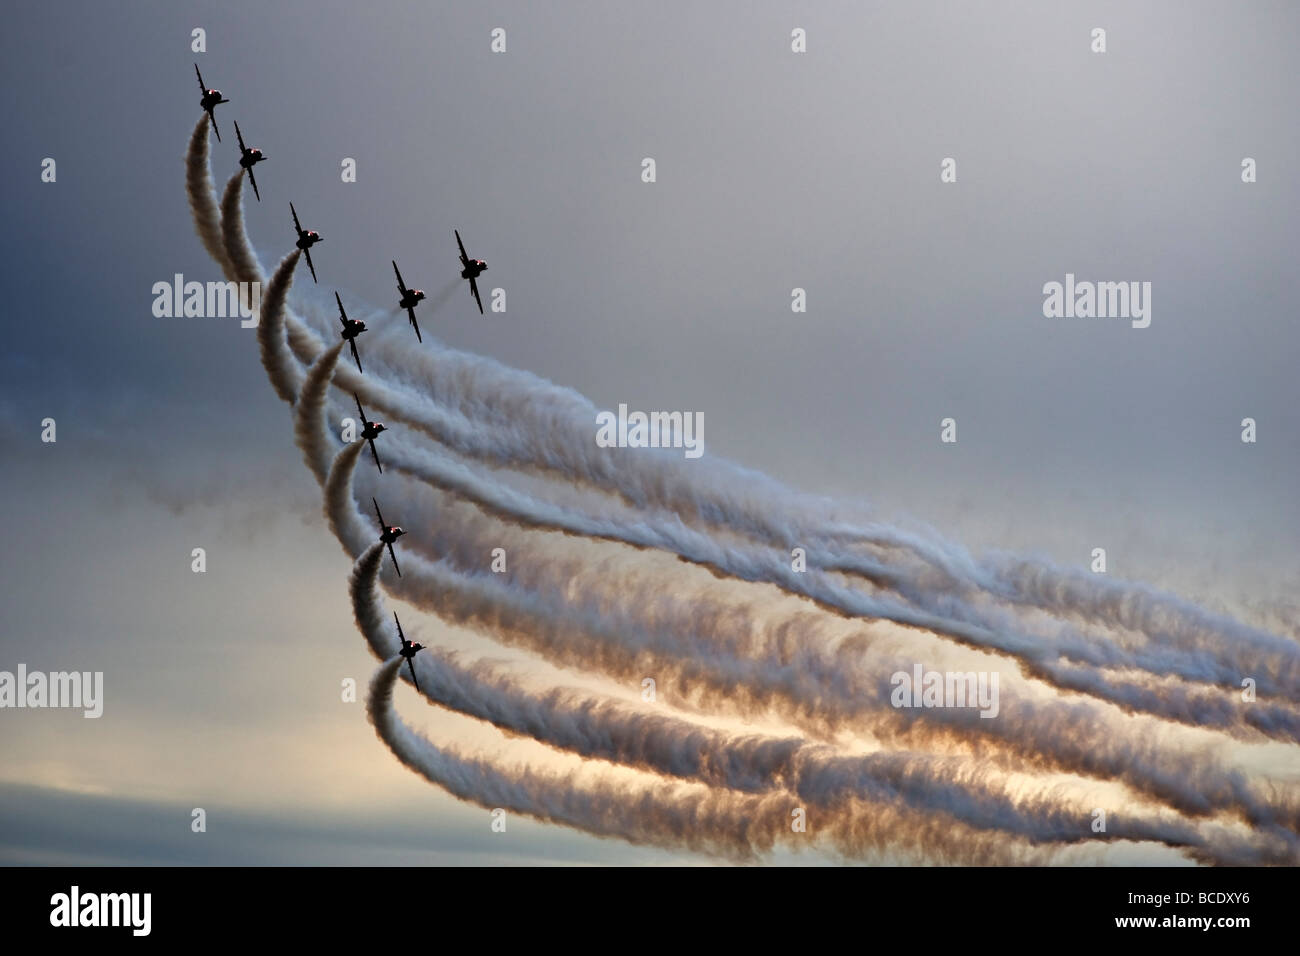 The RAF Red Arrows Display Team perform against a stormy sky at Biggin Hill in July 2009. Stock Photo